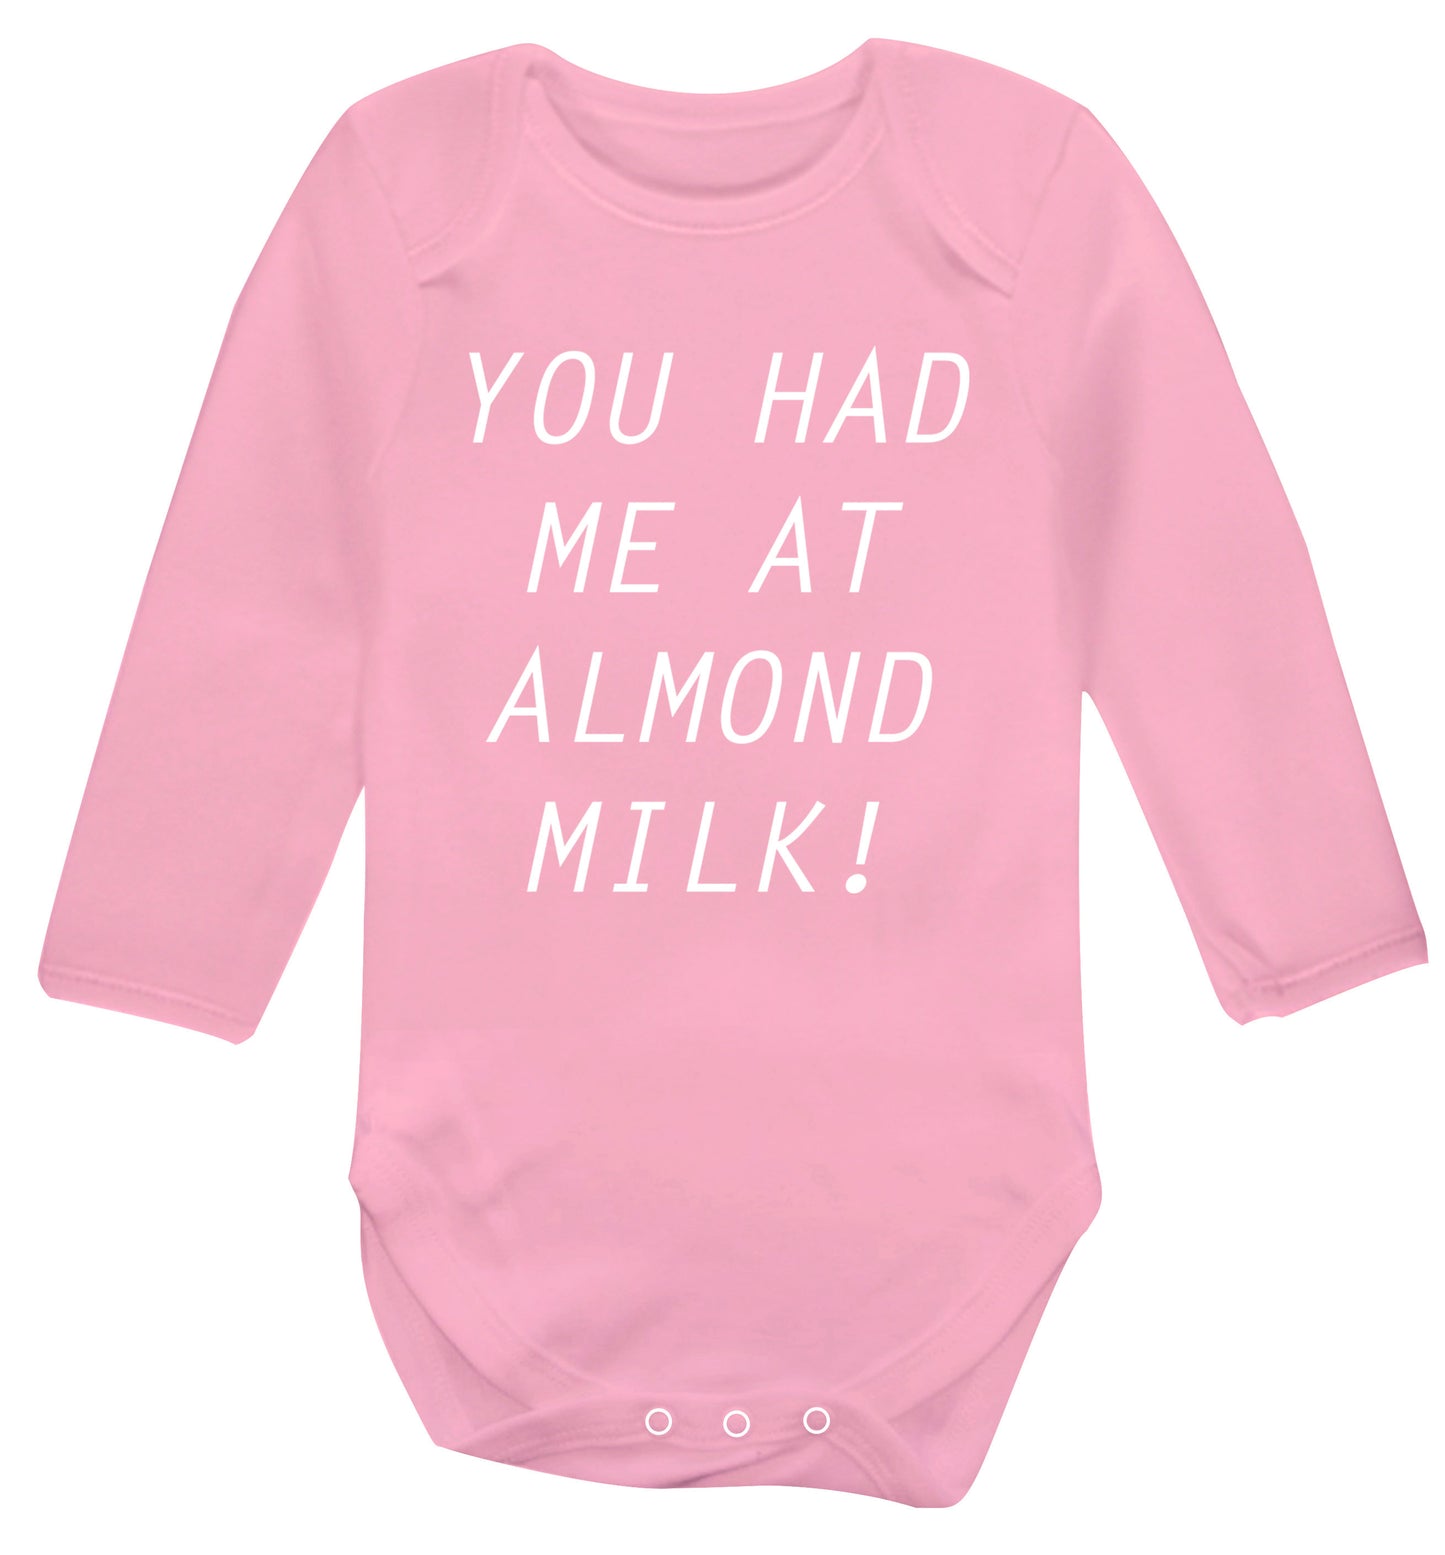 You had me at almond milk Baby Vest long sleeved pale pink 6-12 months